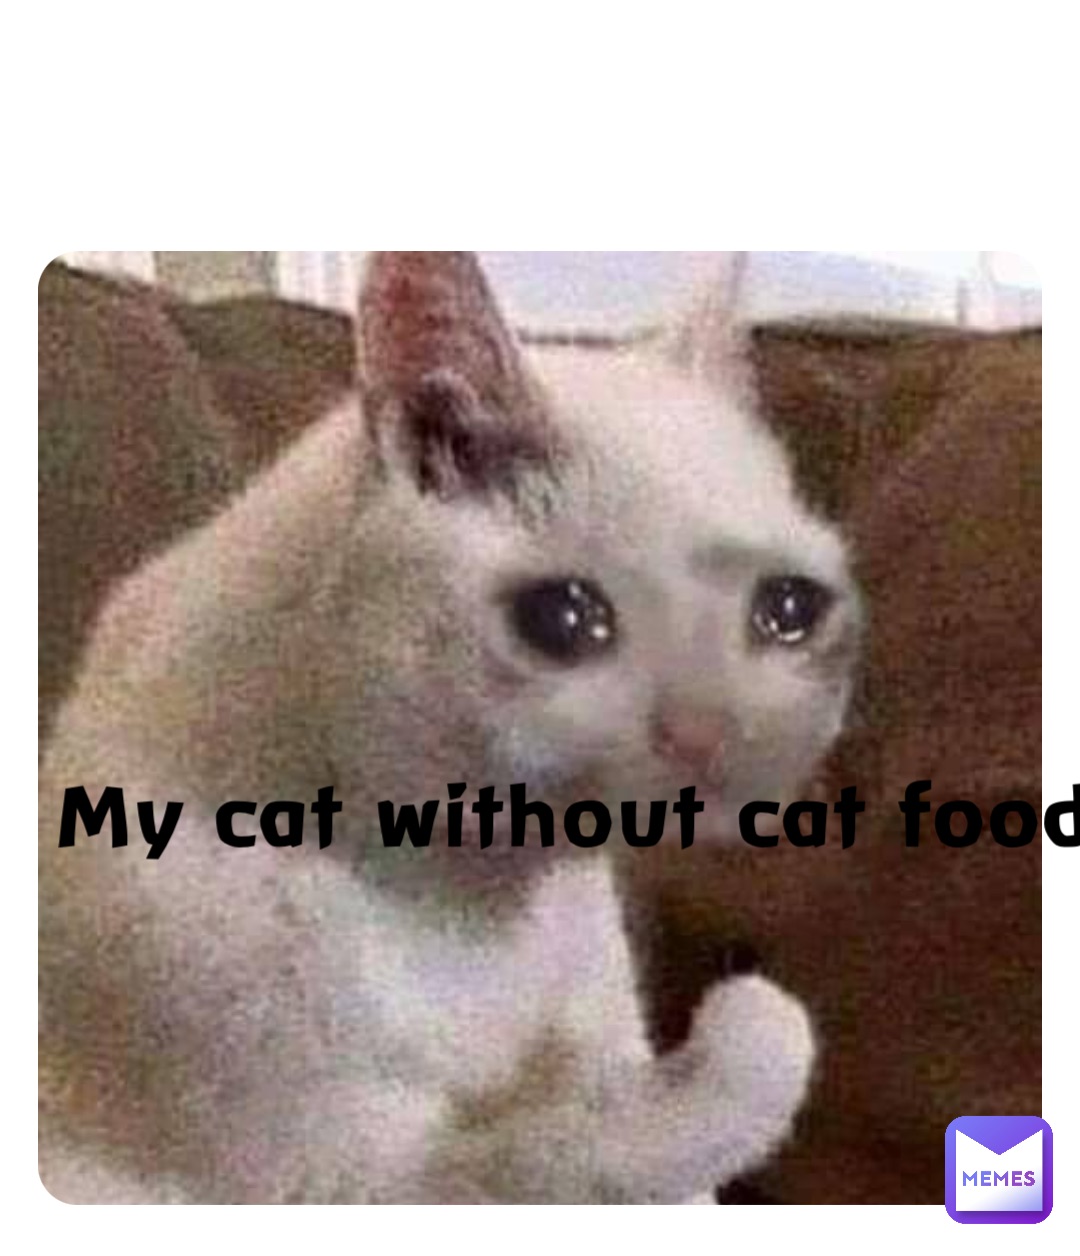 My cat without cat food